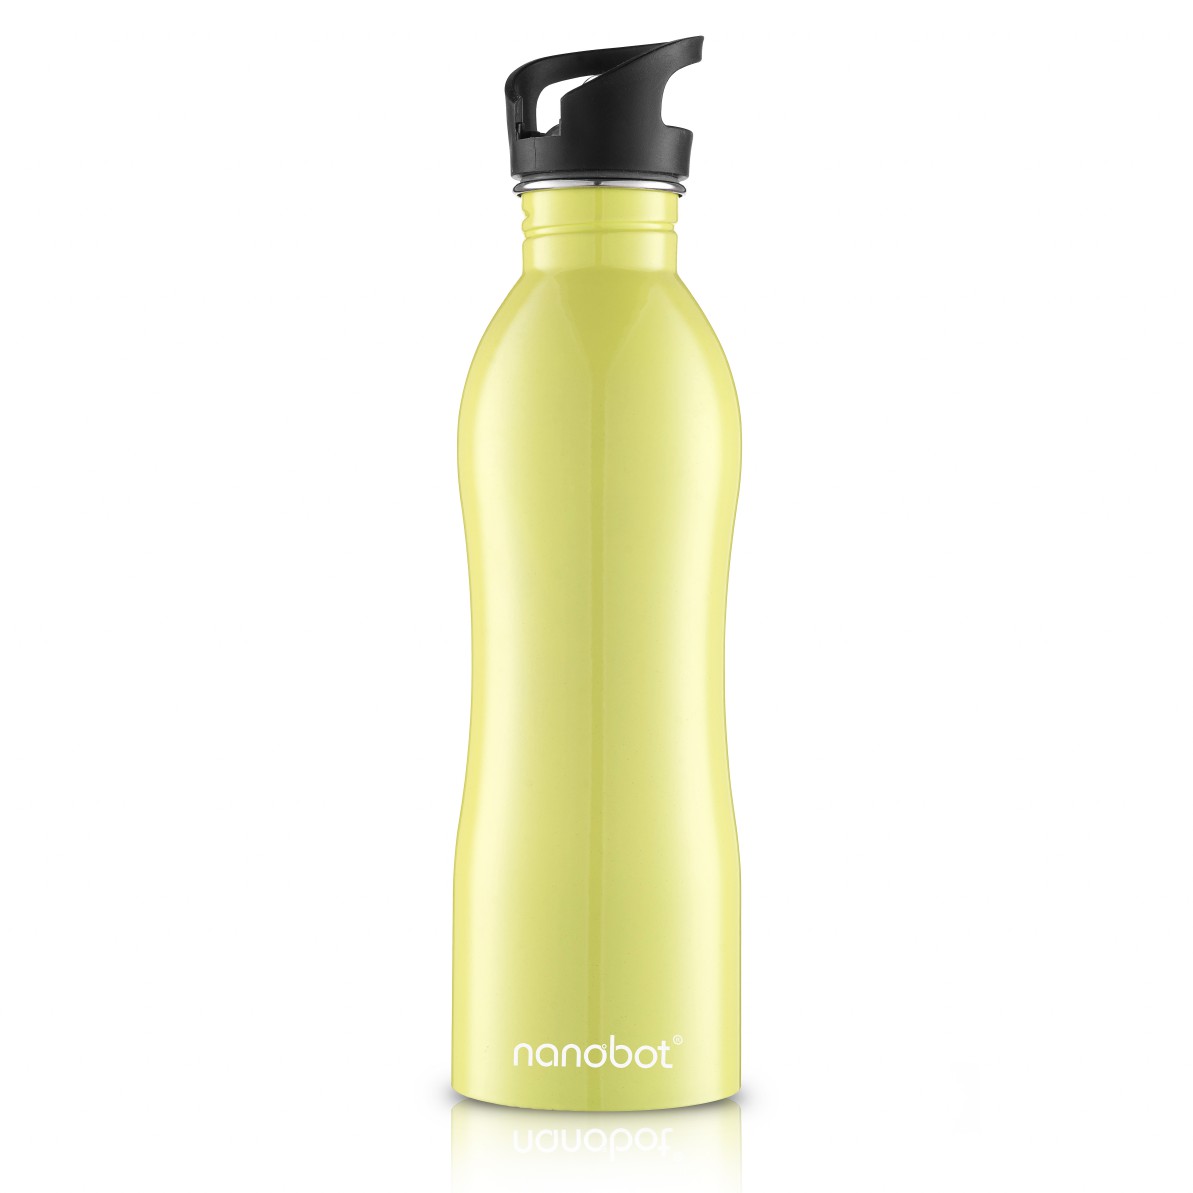 Nanobot -The Perfect Leakproof Water Bottle for School